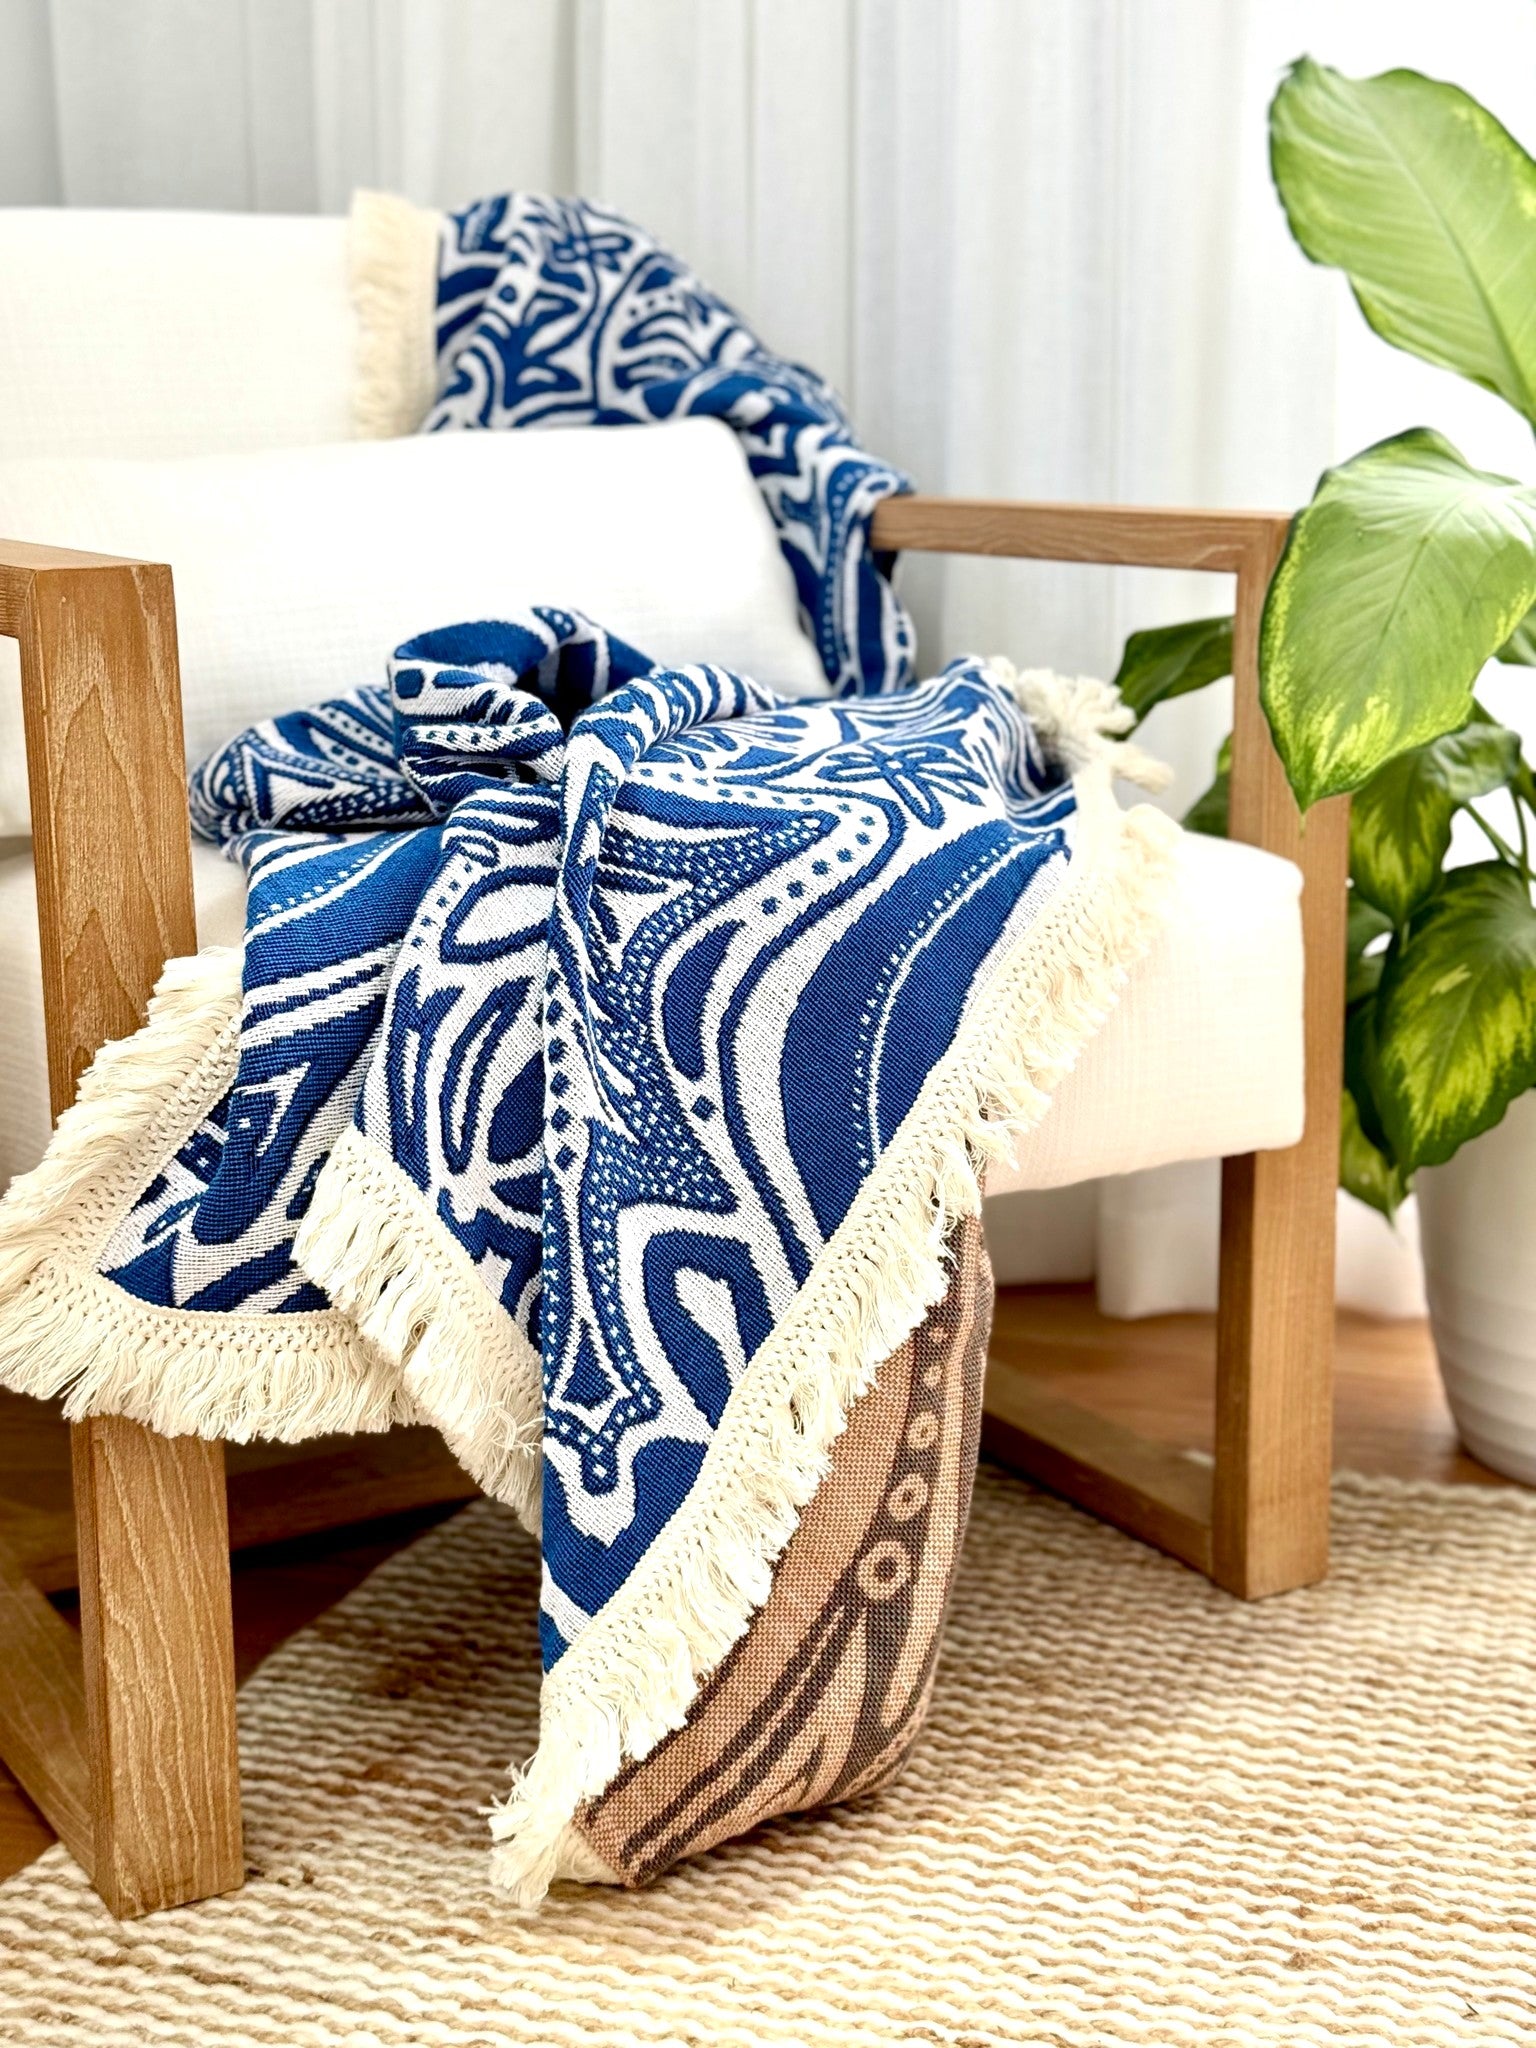 Blue Skies beach blanket, picnic rug or throw rug draped over arm of occasional chair. Designed in Australia. 